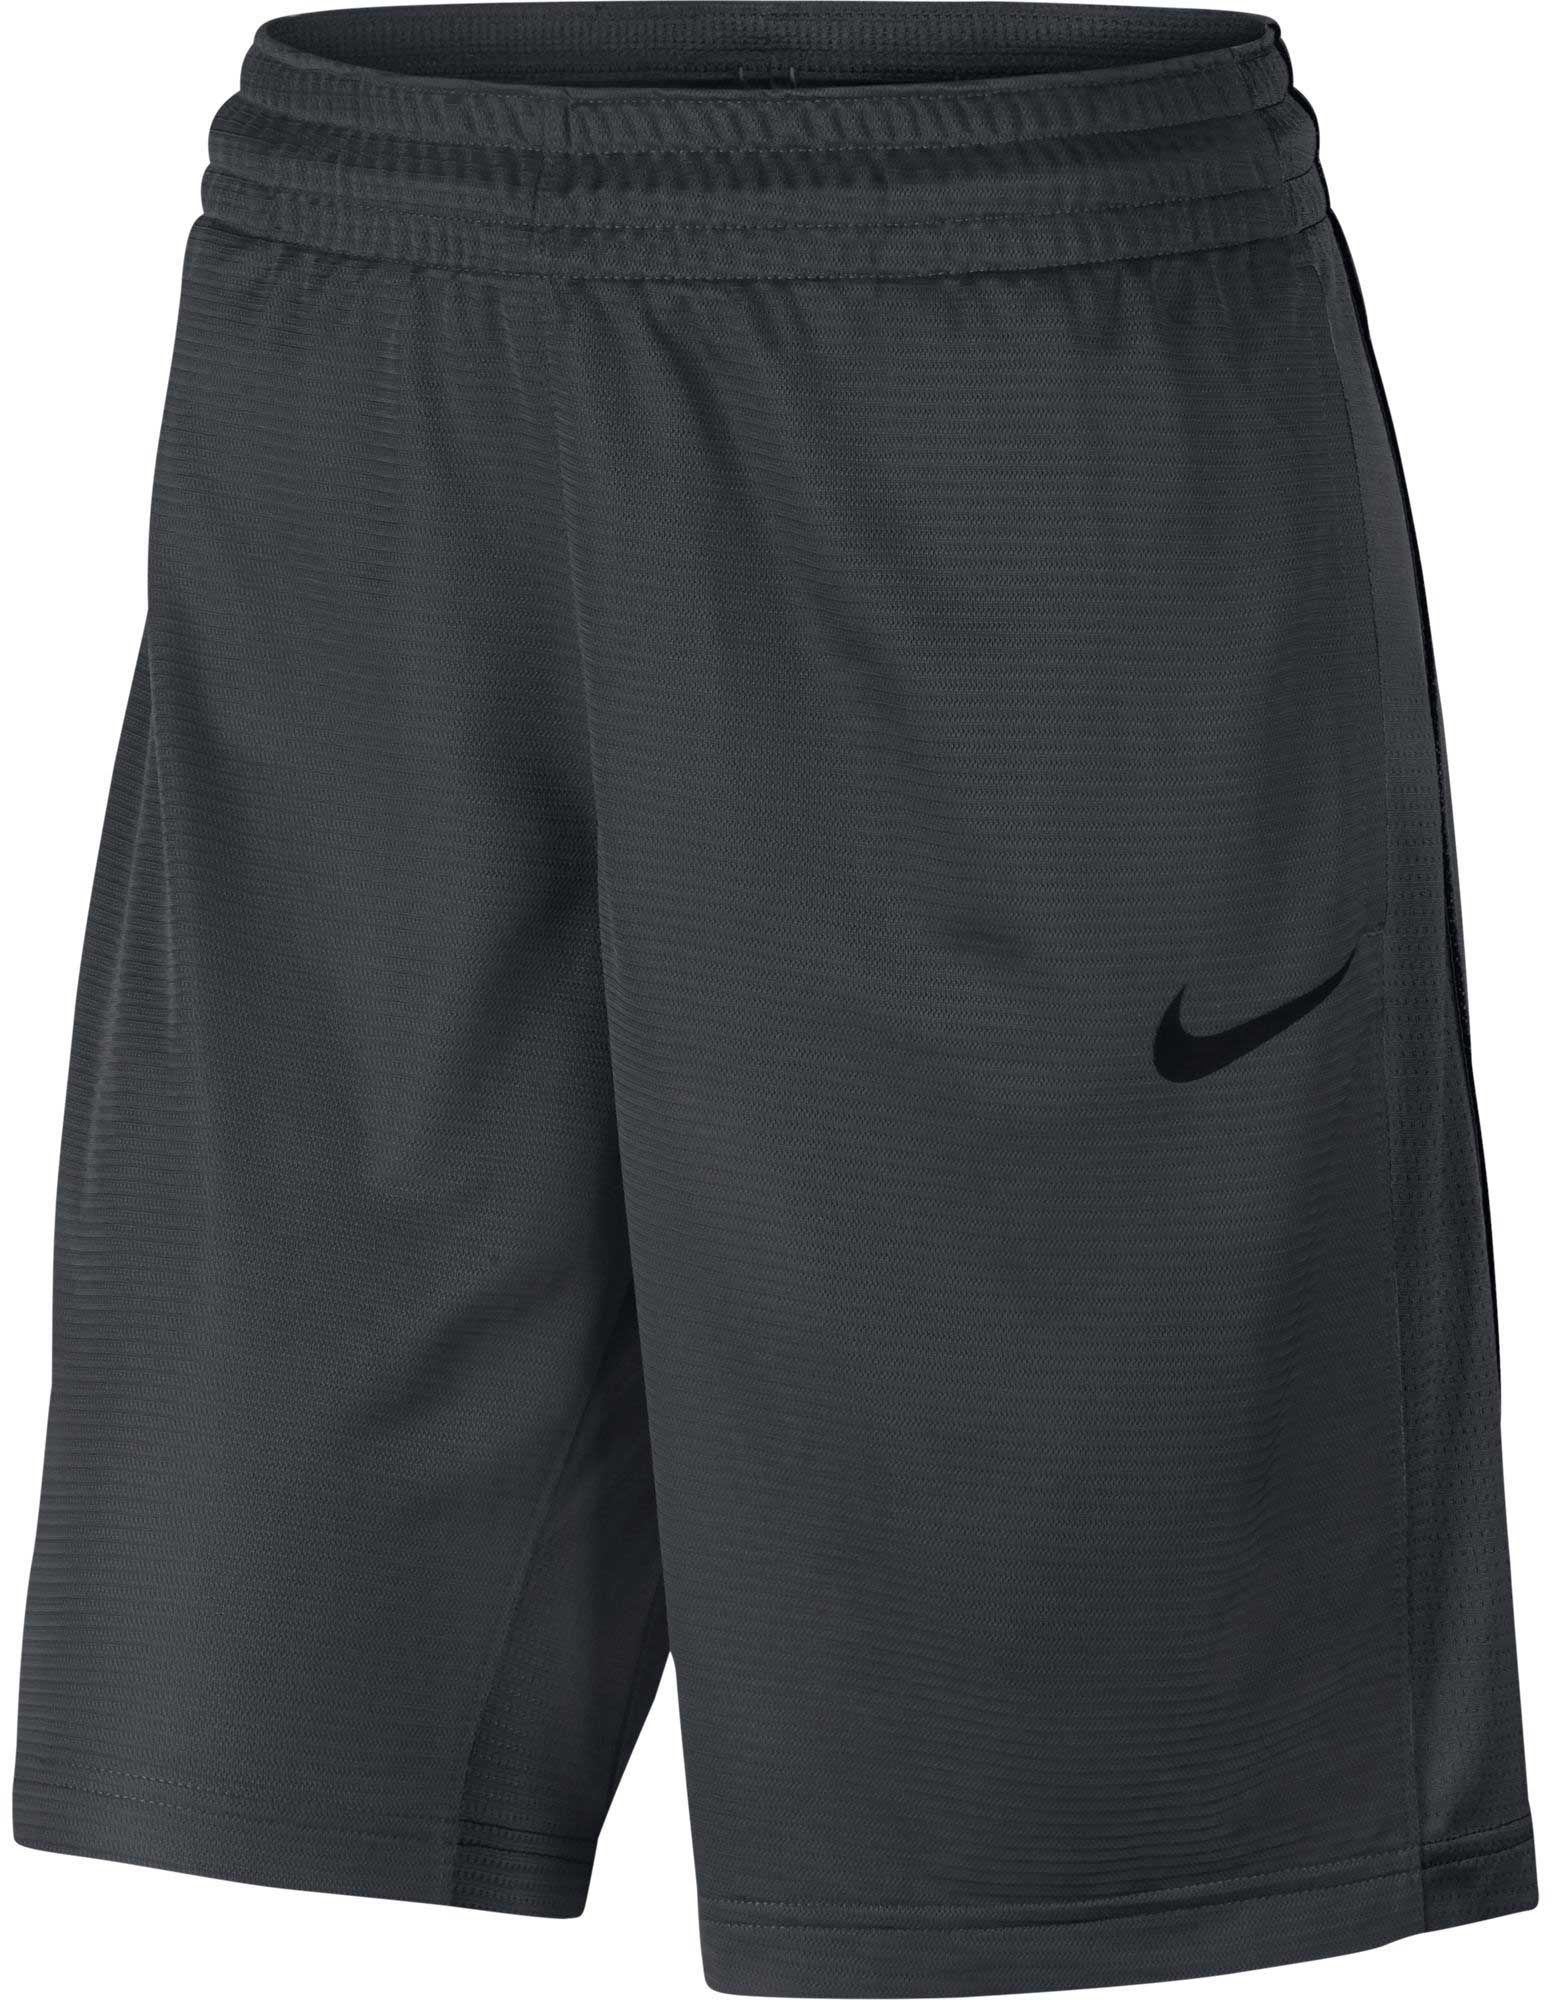 Nike Women's 10'' Dry Essential Basketball Shorts, Anthracite, M